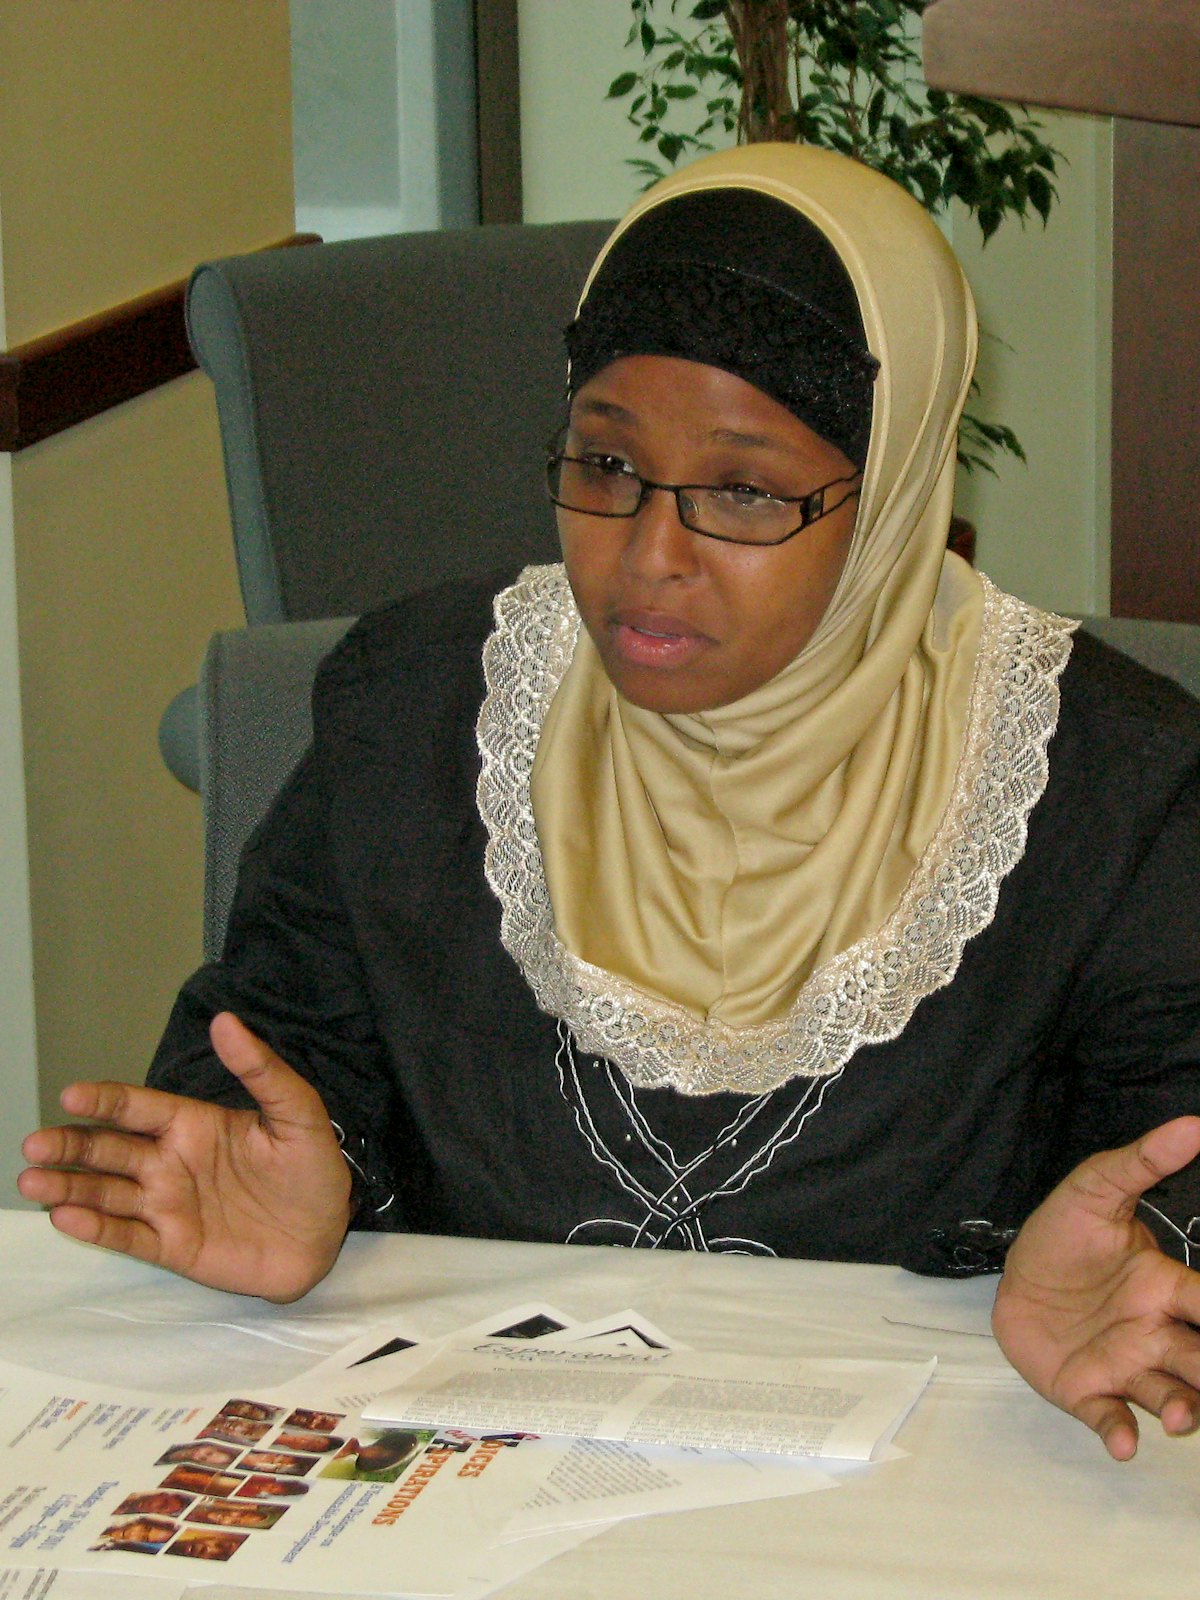 Amira Abdikadir, a member of the World Youth Alliance from Kenya, was among the participants at a workshop session titled "Our Voices, Our Aspirations: A Youth Dialogue on Sustainable Development," held at the UN offices of the Baha'i International Community in New York, 26 July 2011.